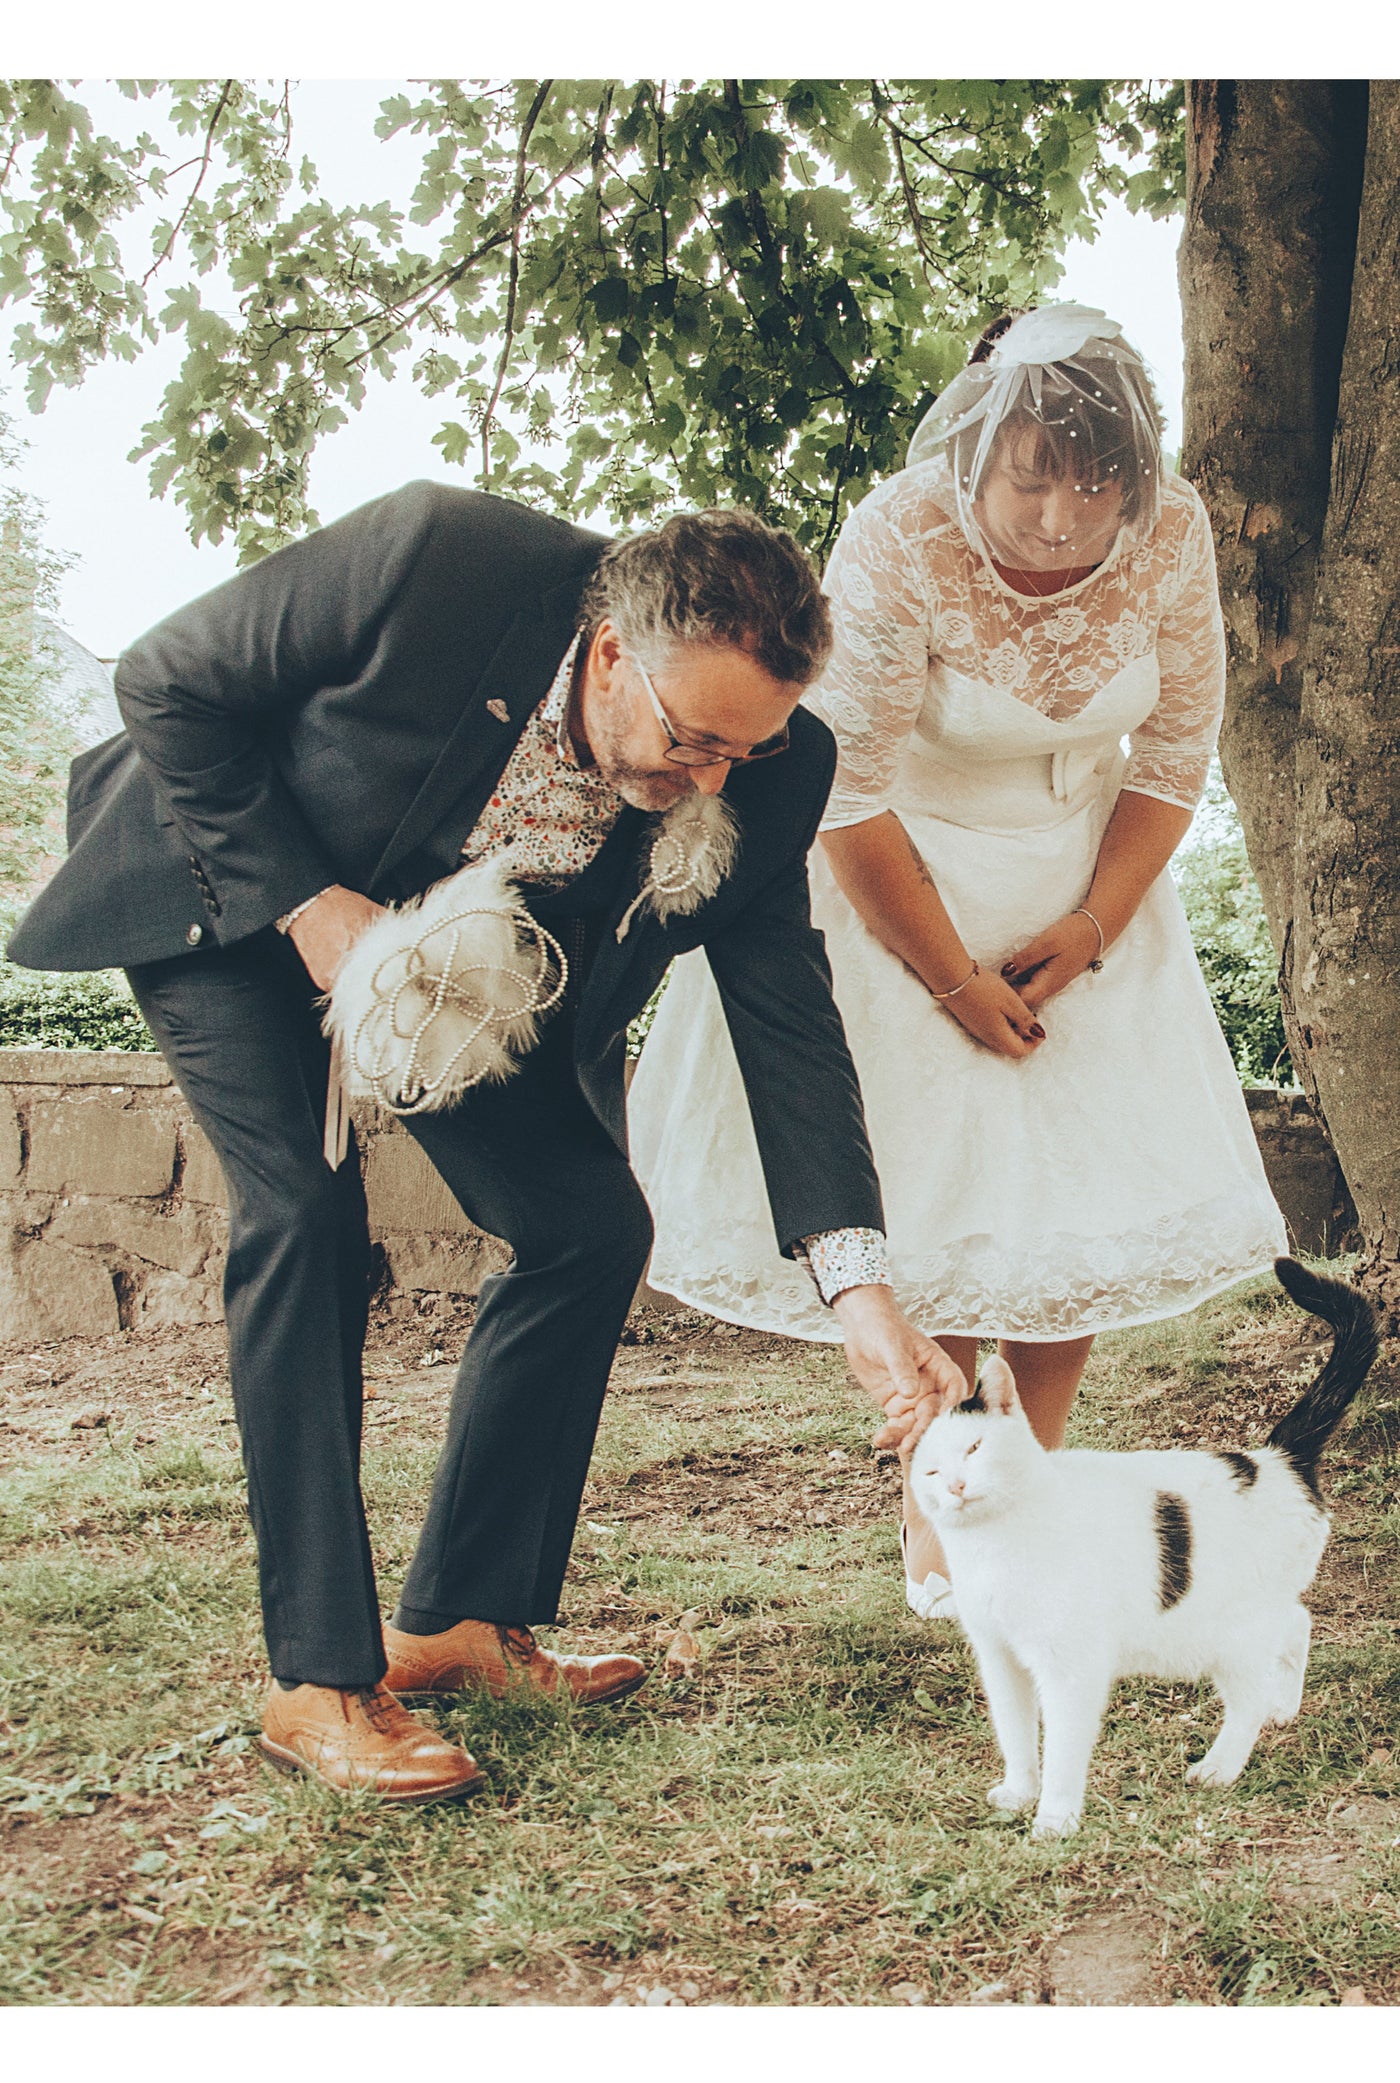 Customer wears our lace covered, sleeved vintage-style wedding dress, with her suited husband, stroking a cat